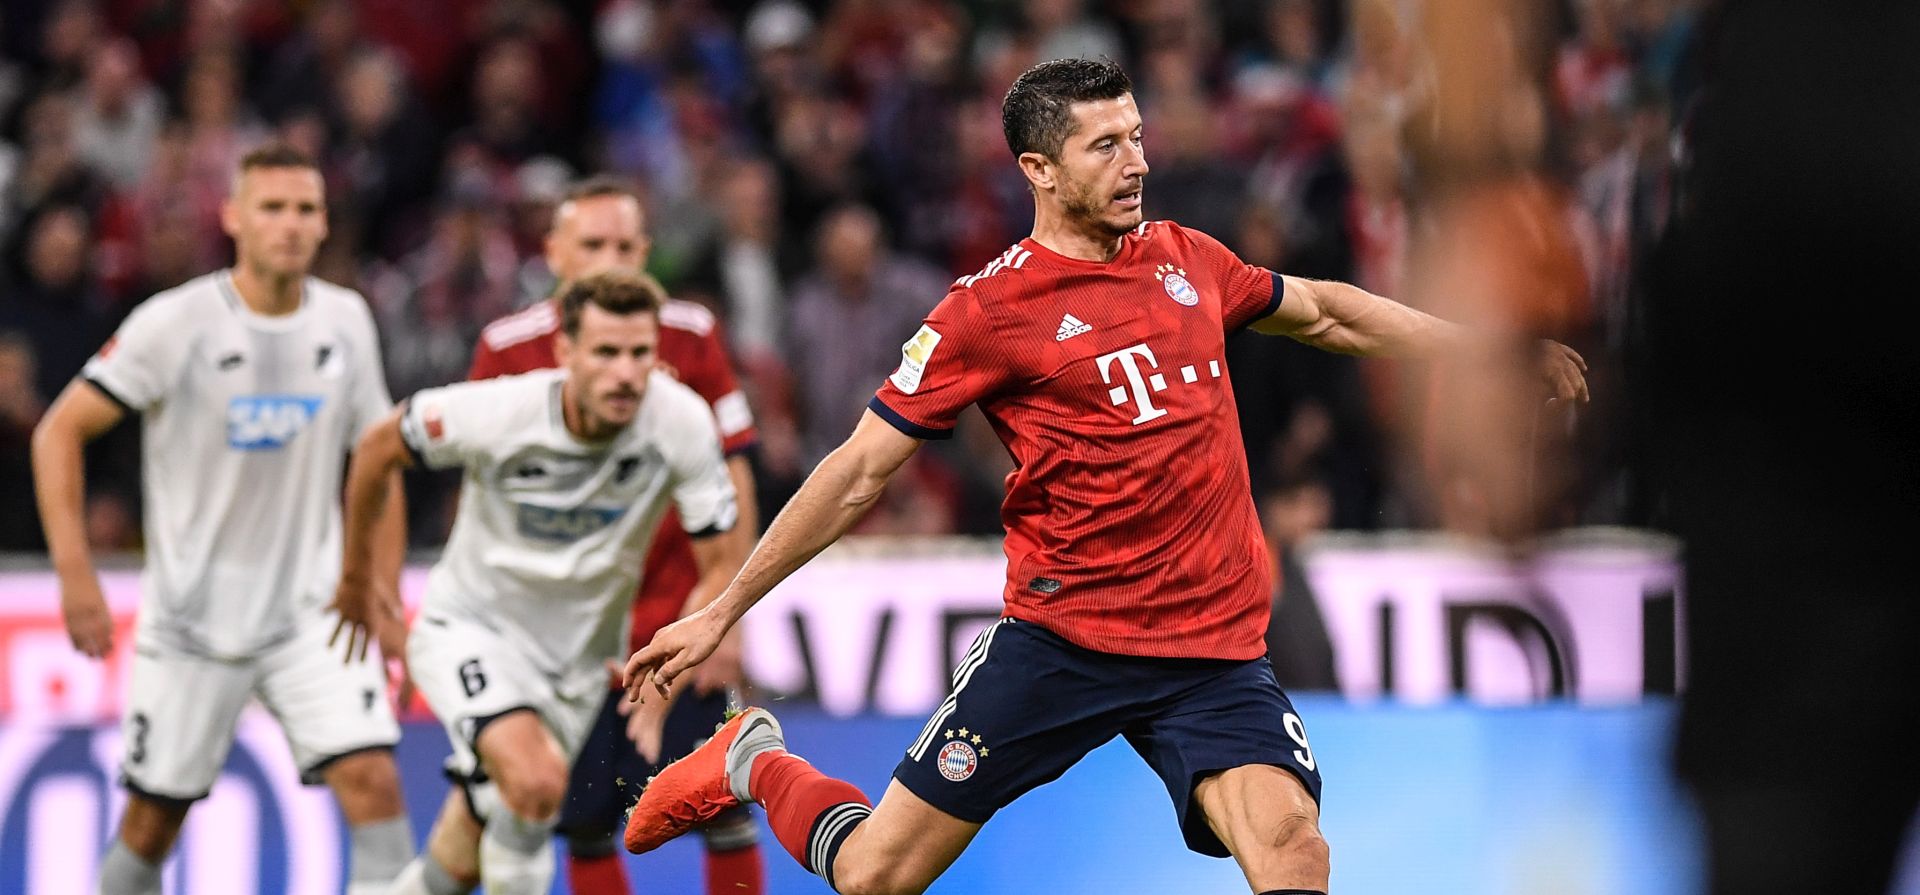 epa06970096 Robert Lewandowski of Bayern Munich scores the 2-1 lead from the penalty spot during the German Bundesliga soccer match between Bayern Munich and 1899 Hoffenheim in Munich, Germany, 24 August 2018.  EPA/LUKAS BARTH-TUTTAS CONDITIONS - ATTENTION:  The DFL regulations prohibit any use of photographs as image sequences and/or quasi-video.